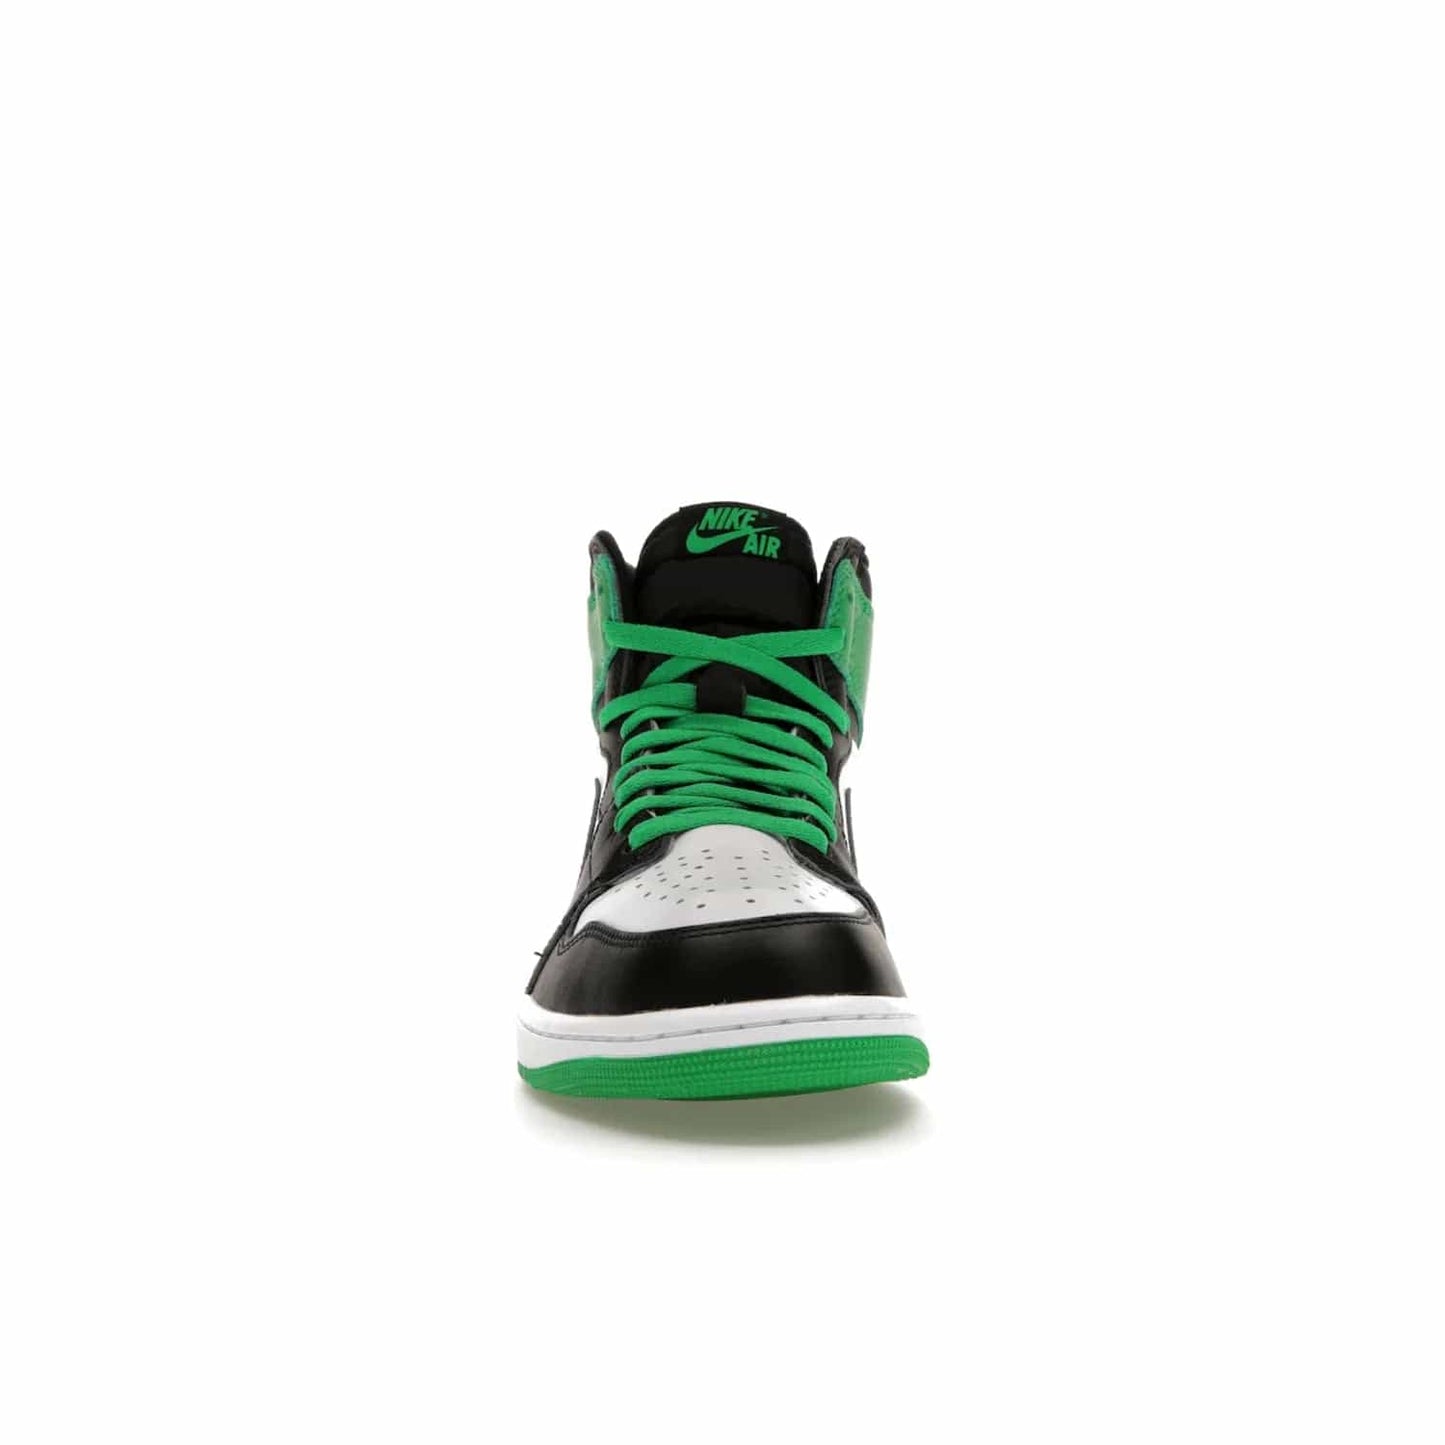 Jordan 1 Retro High OG Lucky Green - Image 10 - Only at www.BallersClubKickz.com - Experience luck with the release of the Air Jordan 1 Retro High OG Lucky Green. A leather upper with black, white and signature green accents hits the mark. Nike branding in Lucky Green and laces complete the look. Get lucky April 15, 2023.